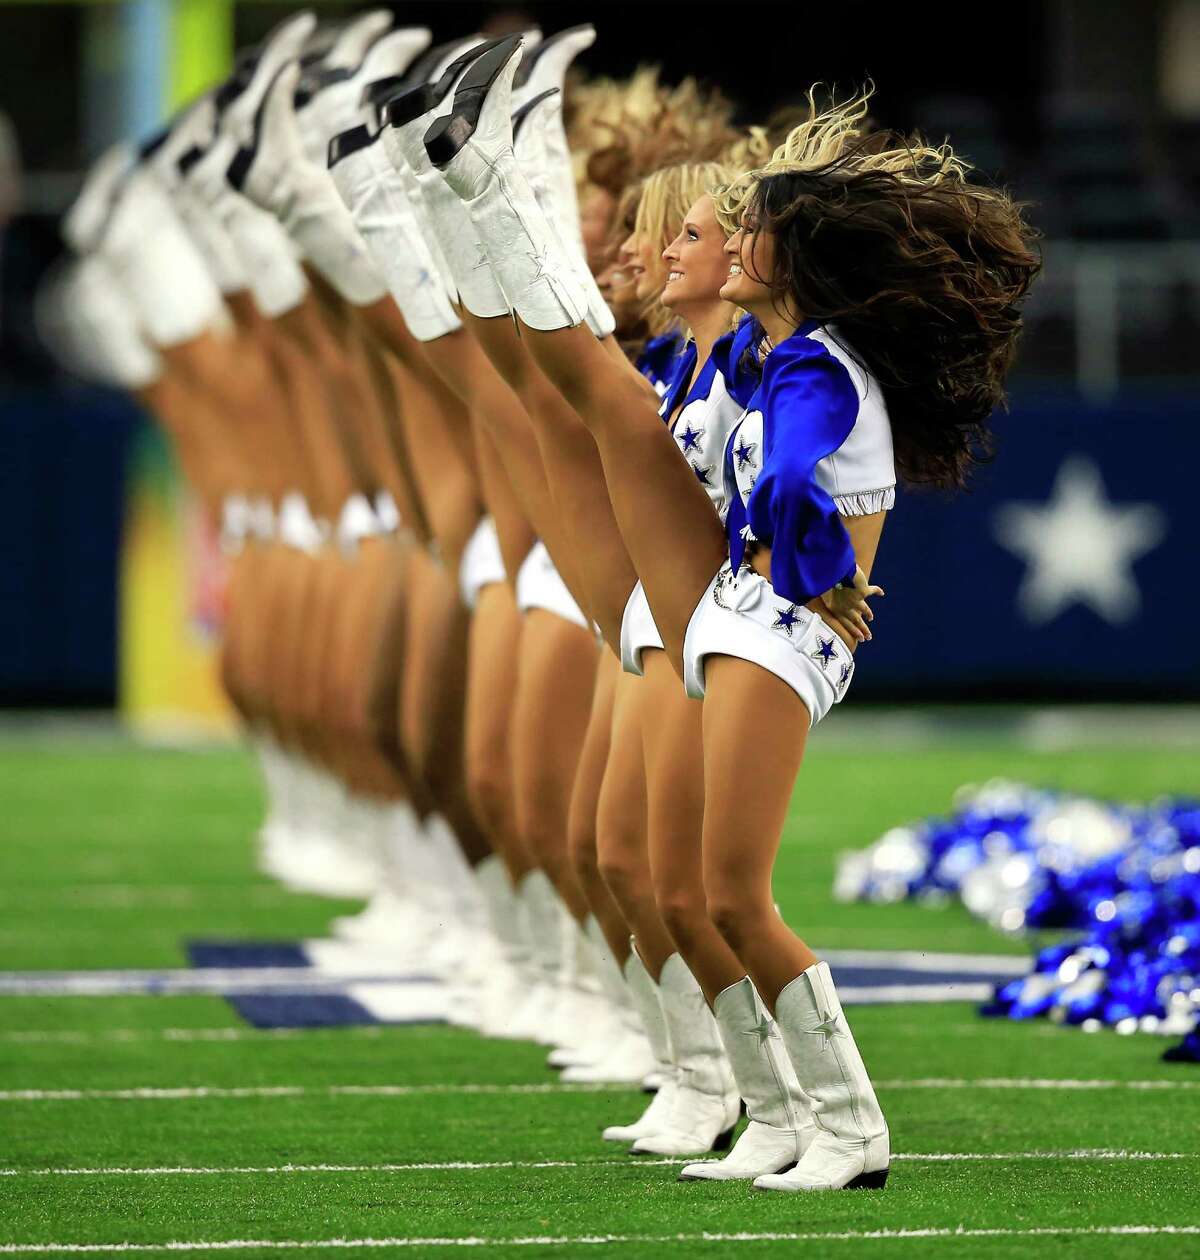 ARLINGTON, TX - SEPTEMBER 22: The Dallas Cowboys cheerleaders perform during the game against the St. Louis Rams at AT&T Stadium on September 22, 2013 in Arlington, Texas.